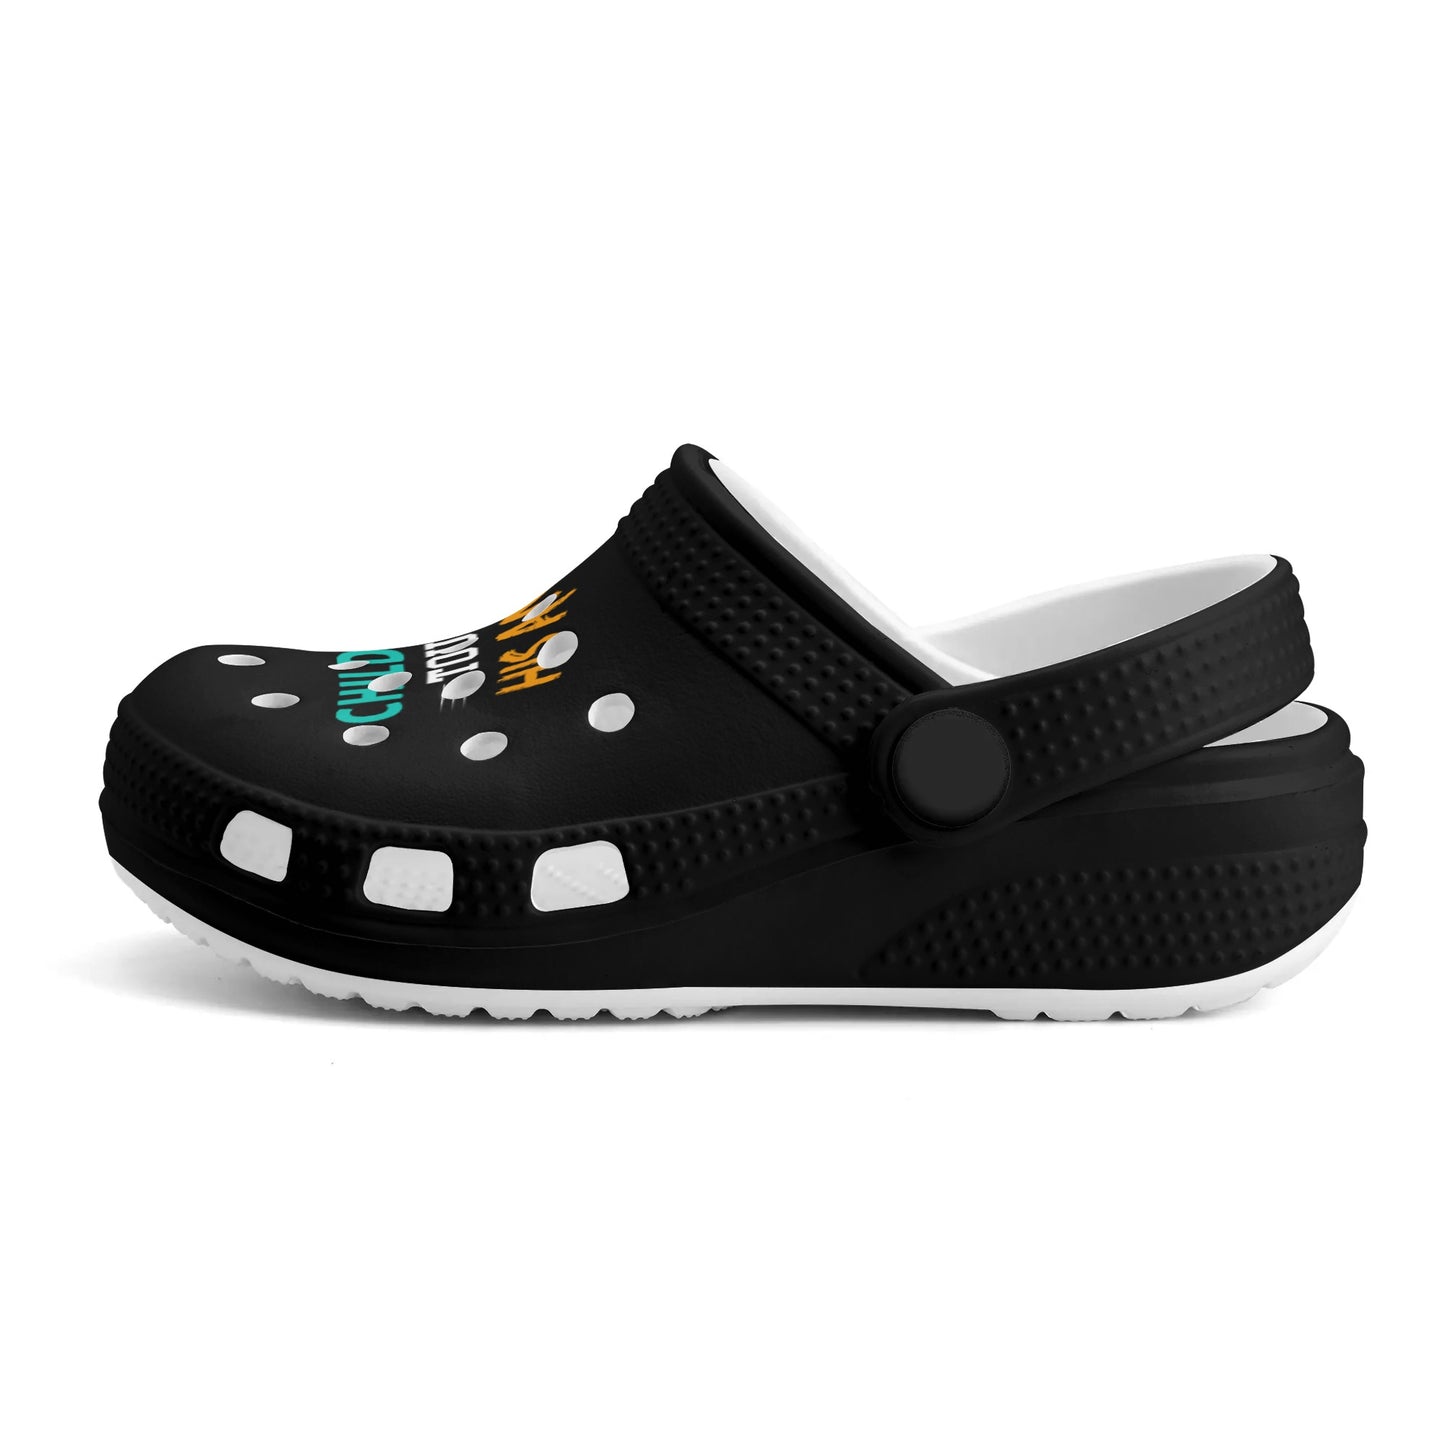 Child Of God Touch Not His Anointed Kids Classic Christian Crocs popcustoms